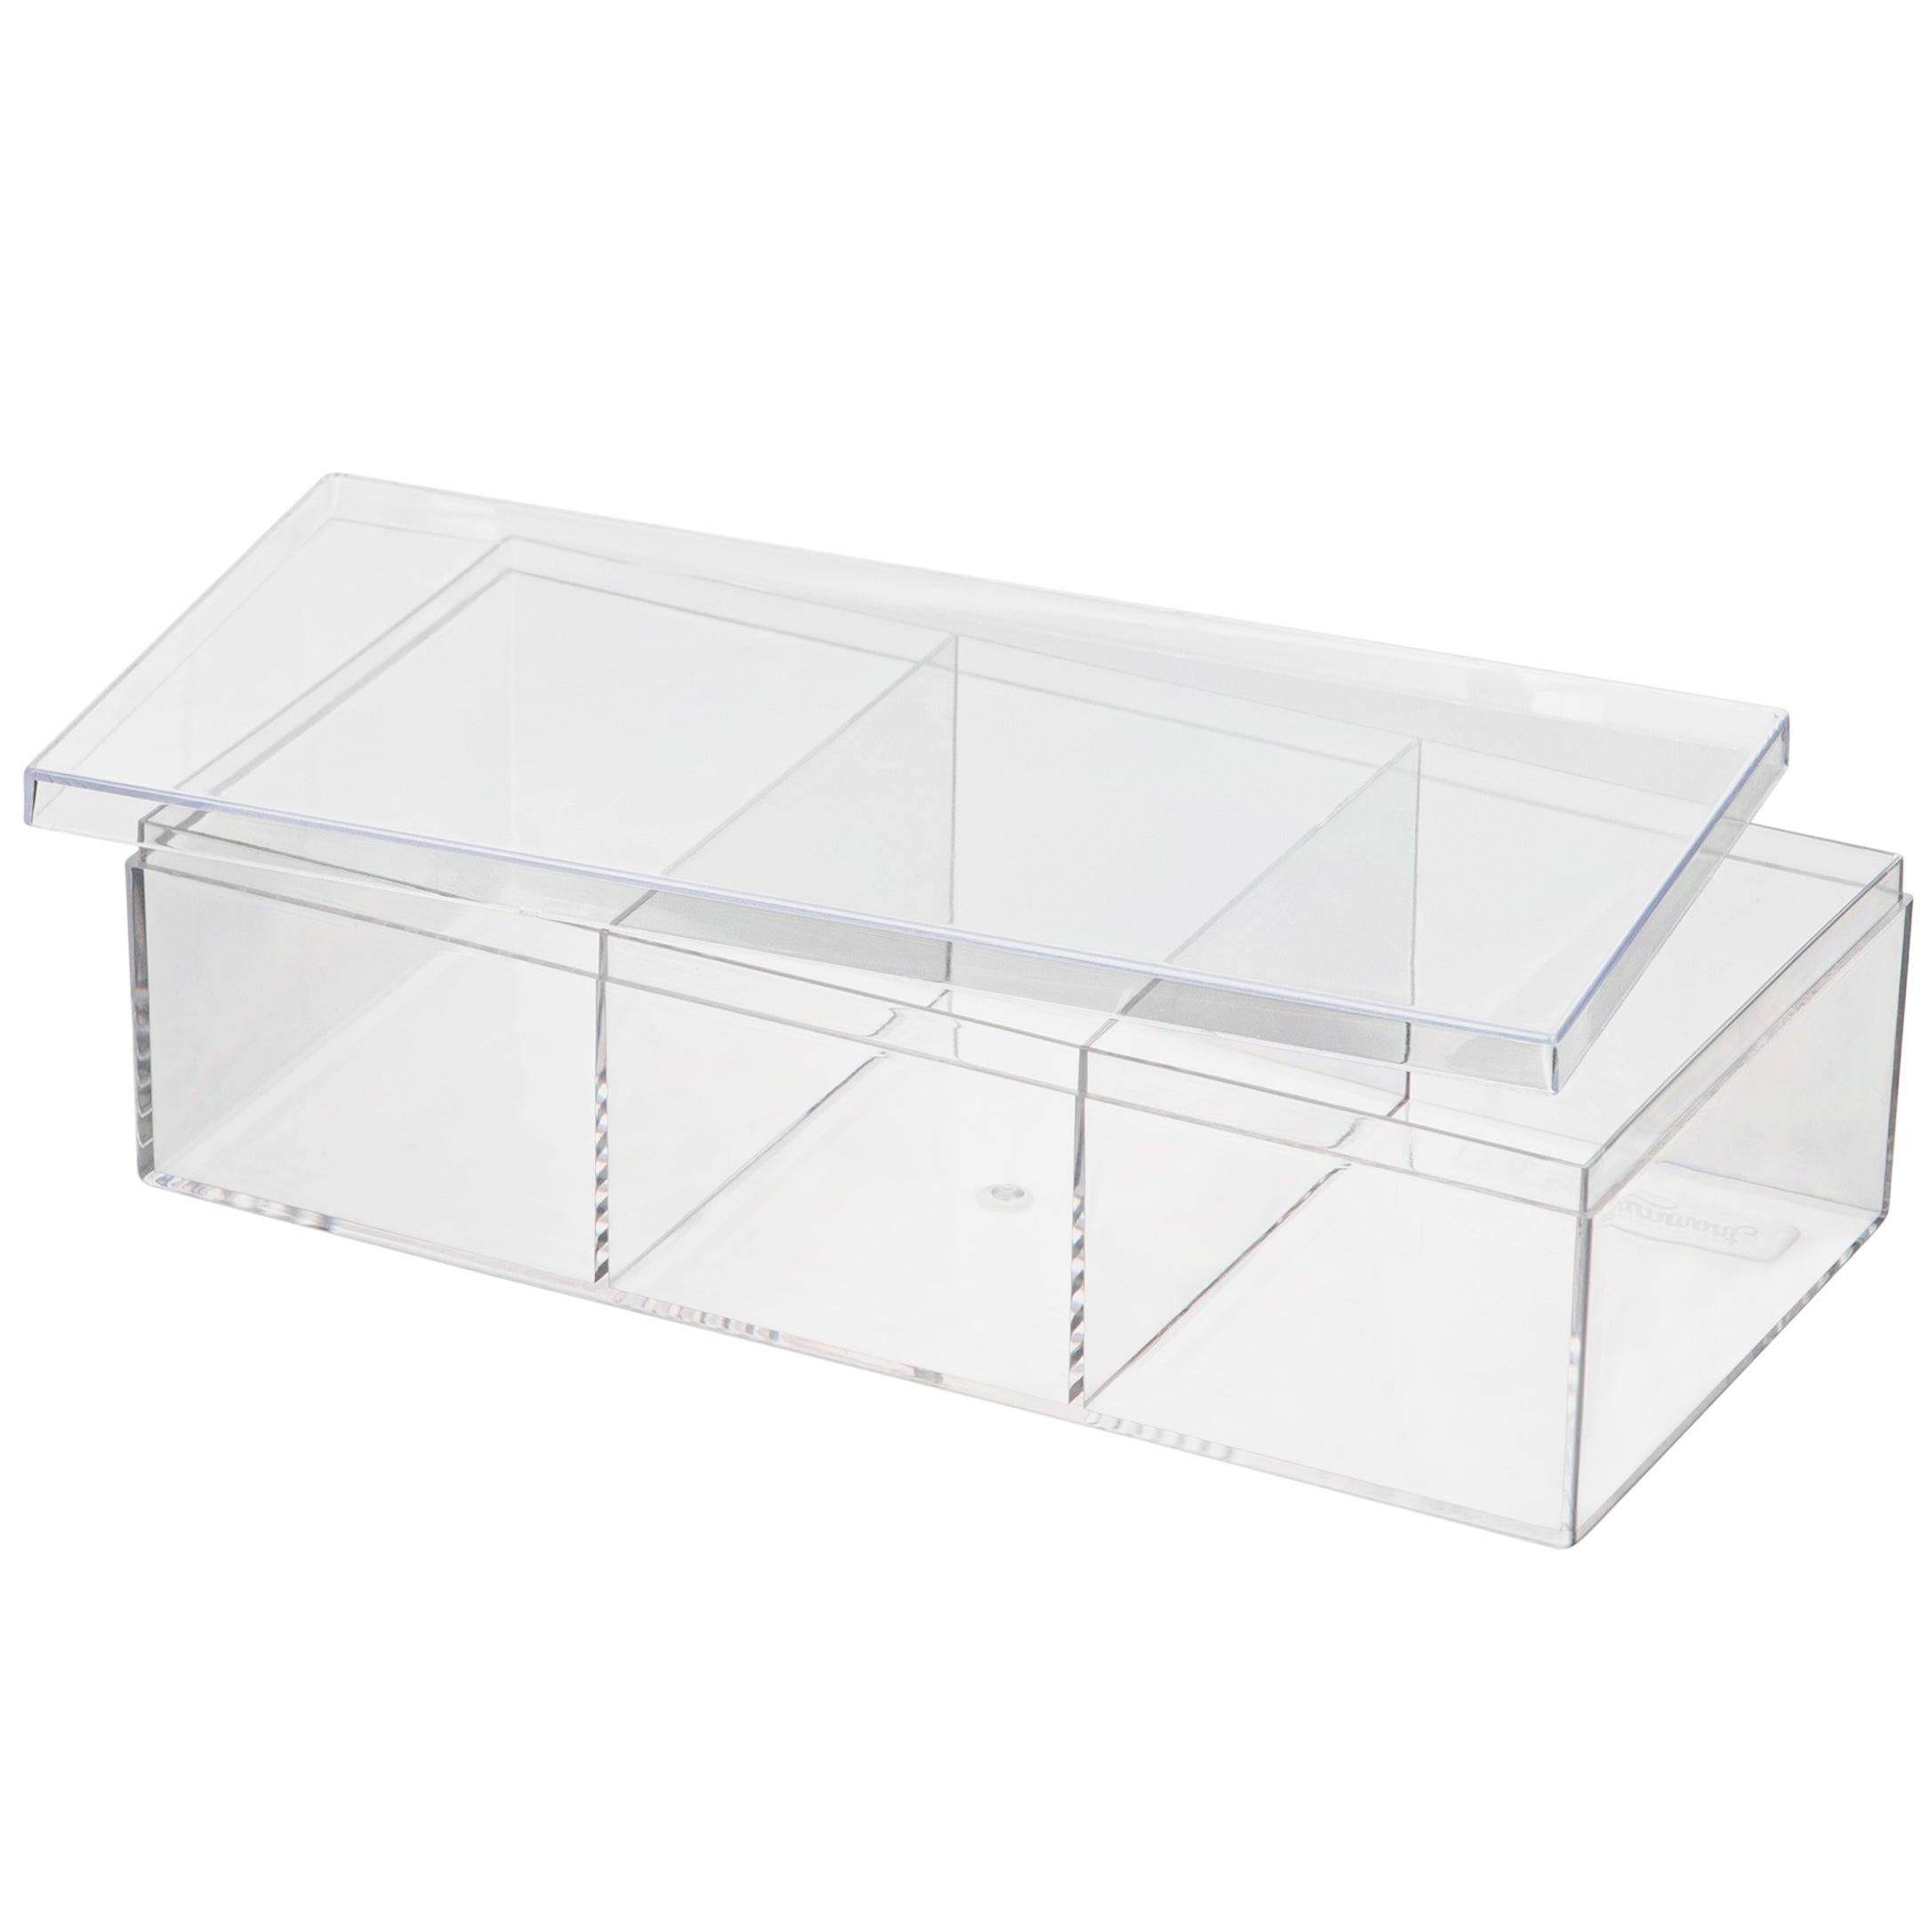 Clear Acrylic Boxes 3.75X3.75X2.5 8 Pack